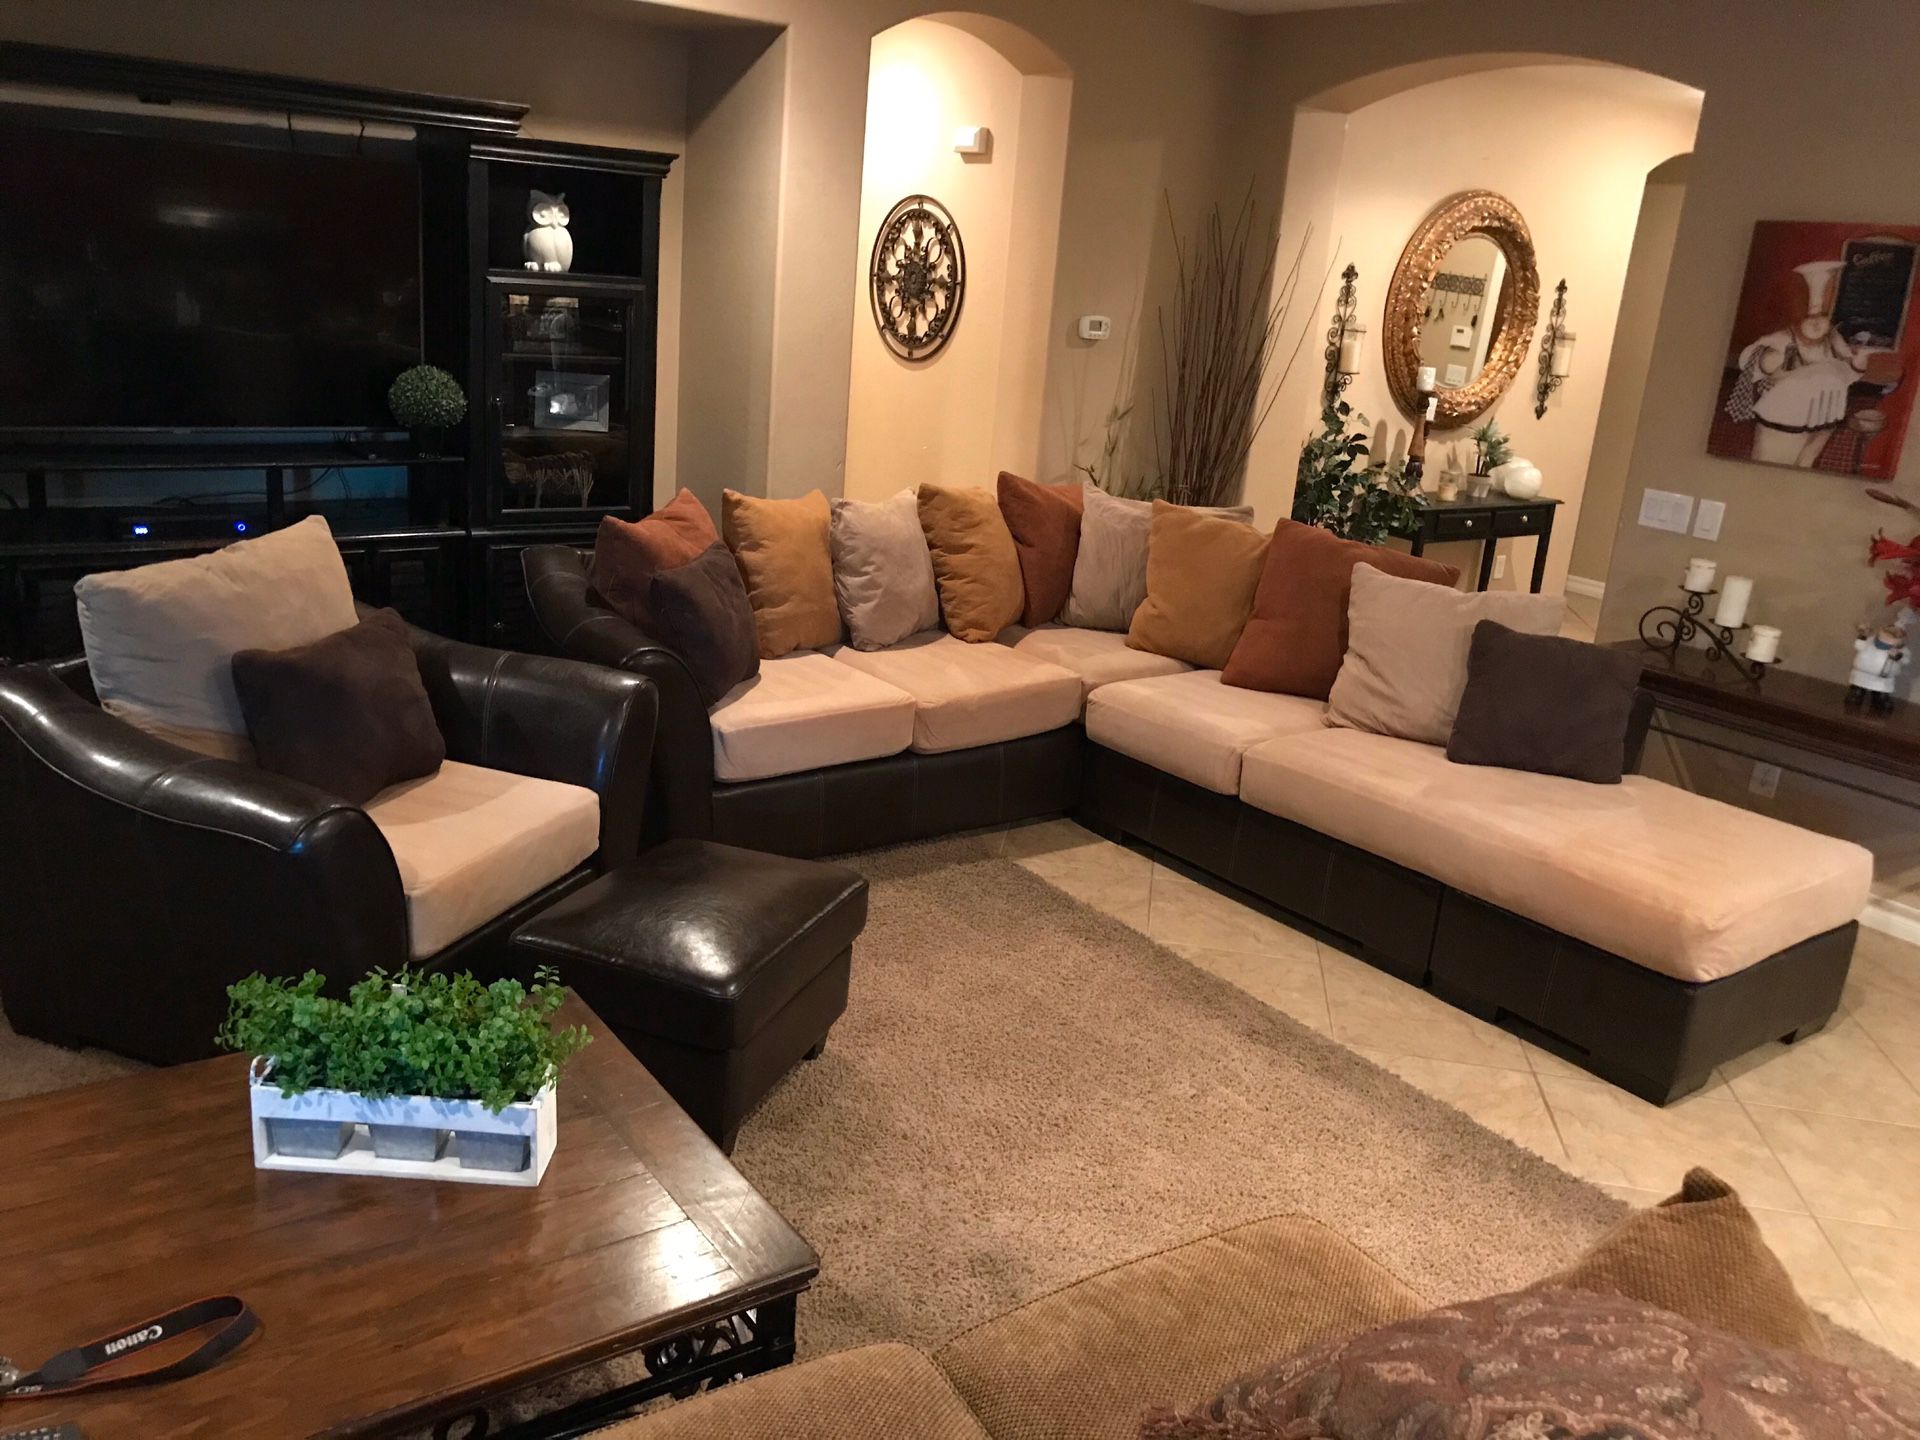 Sectional couch and chair w/ small ottoman